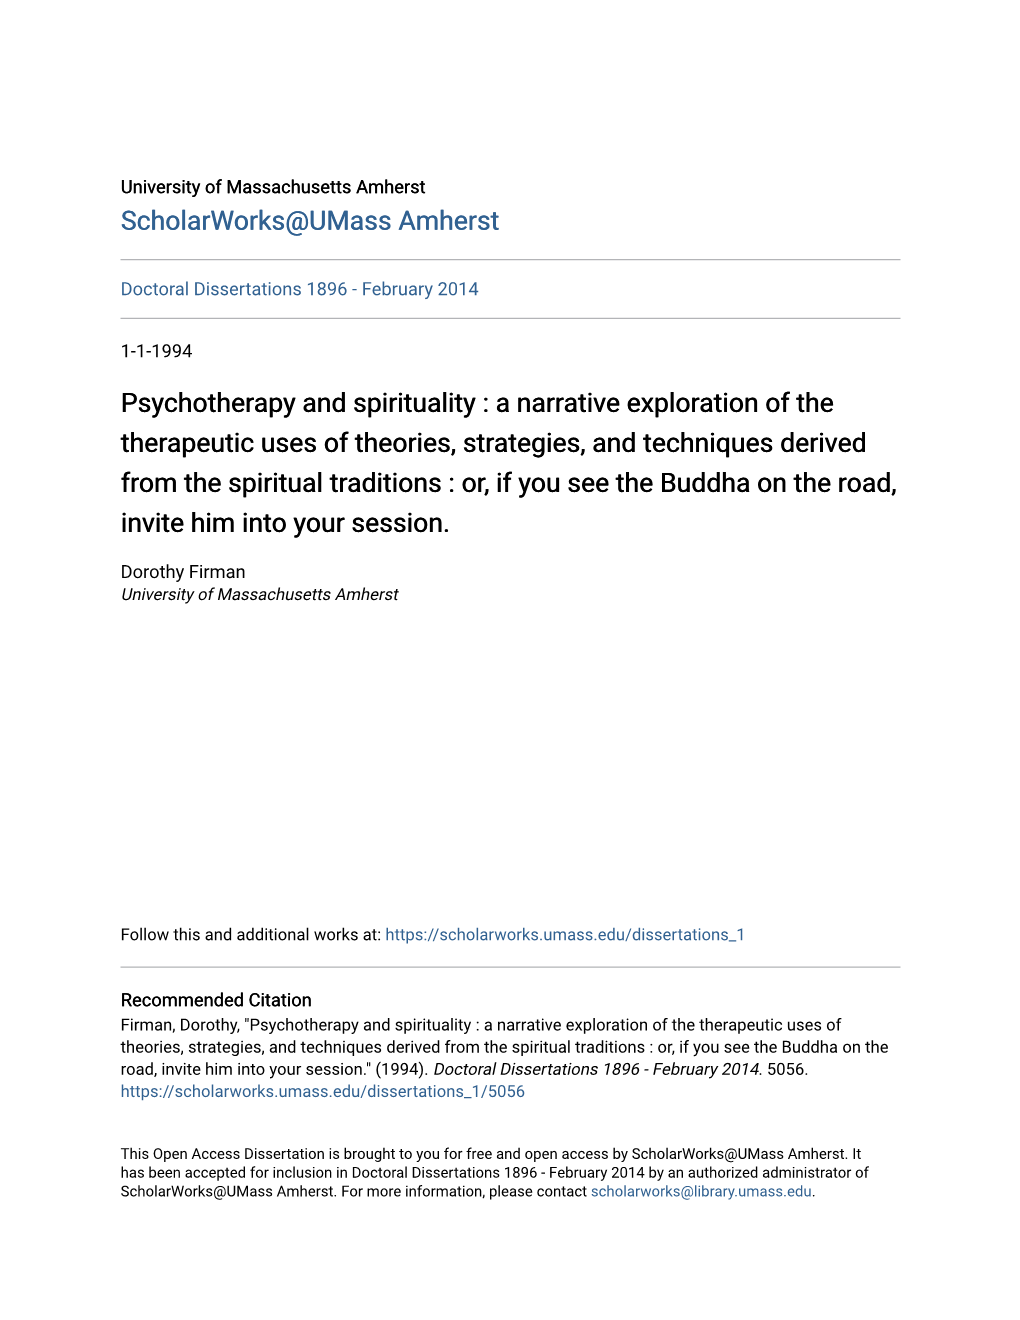 Psychotherapy and Spirituality